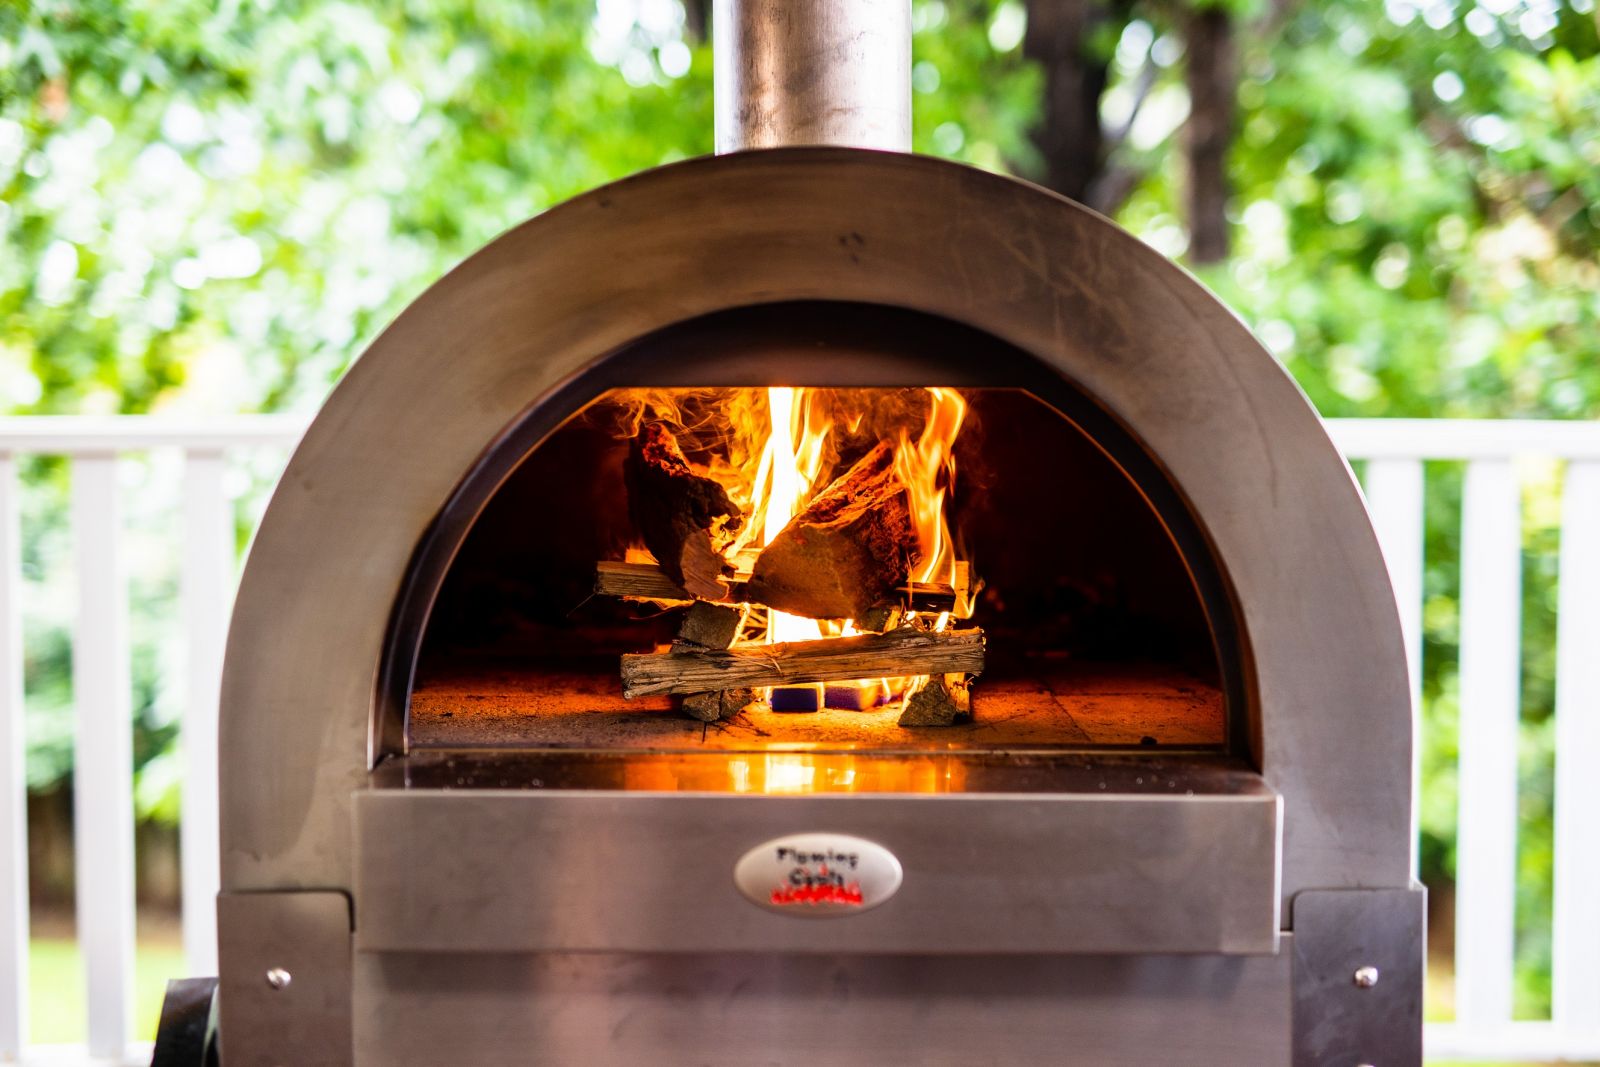 This_image_shows_fire_started_on_the Wood_fired_pizza_oven